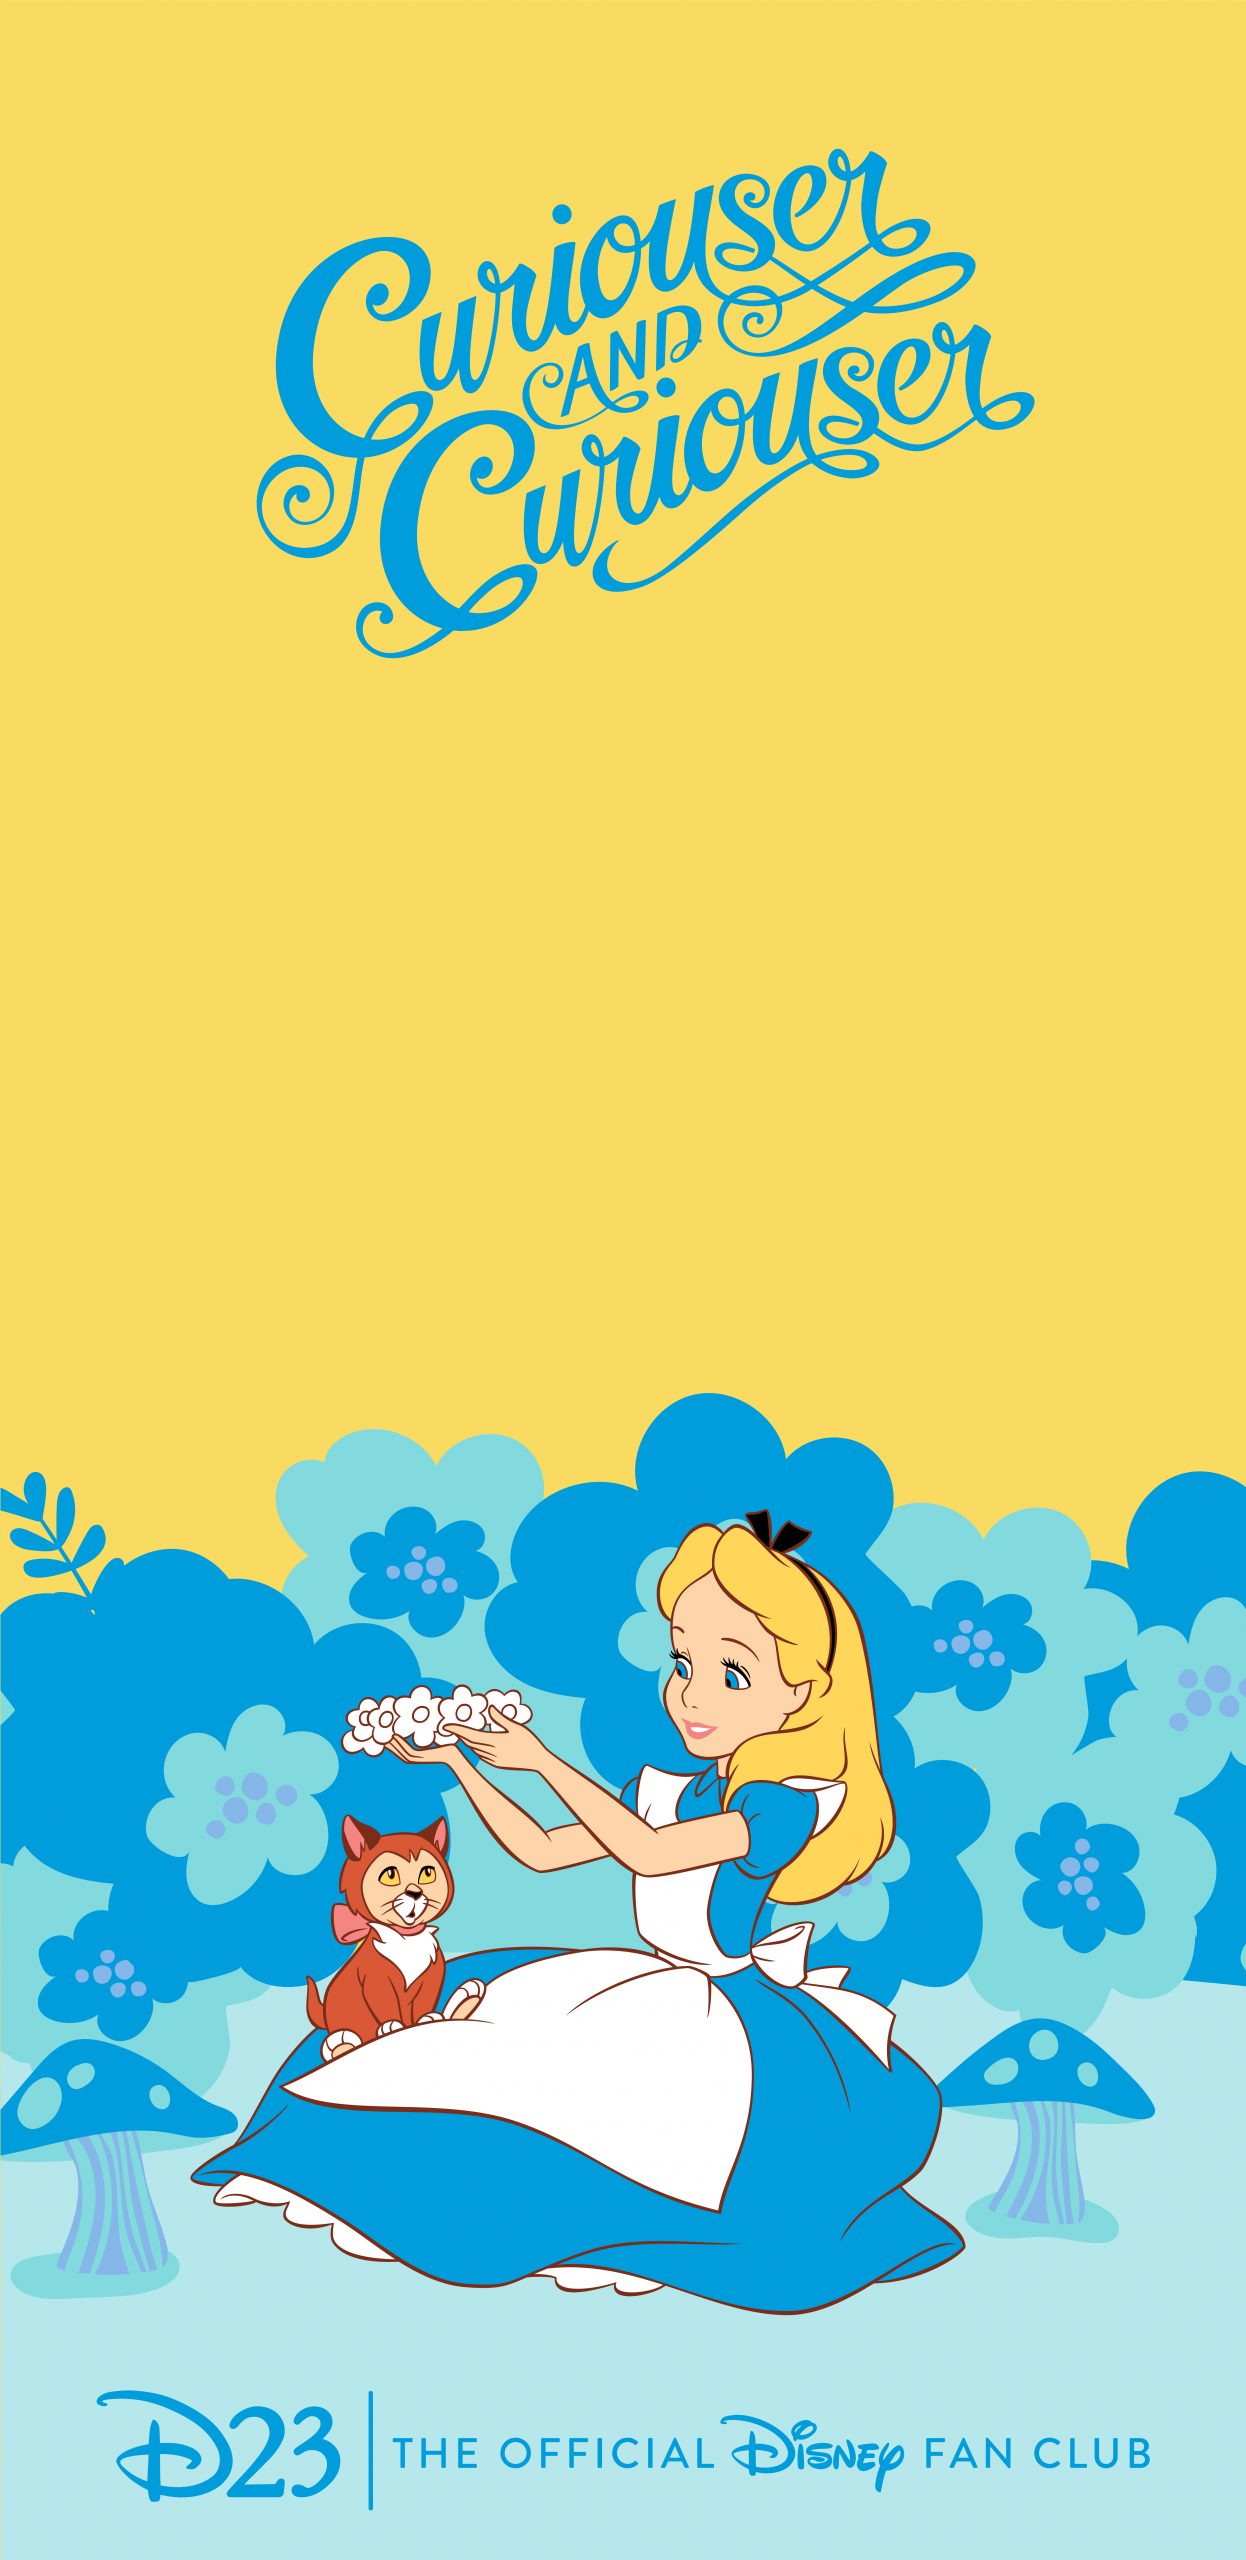 Make Your Phone a Wonderland with These Wallpapers Celebrating 70 Years of  Alice in Wonderland - D23